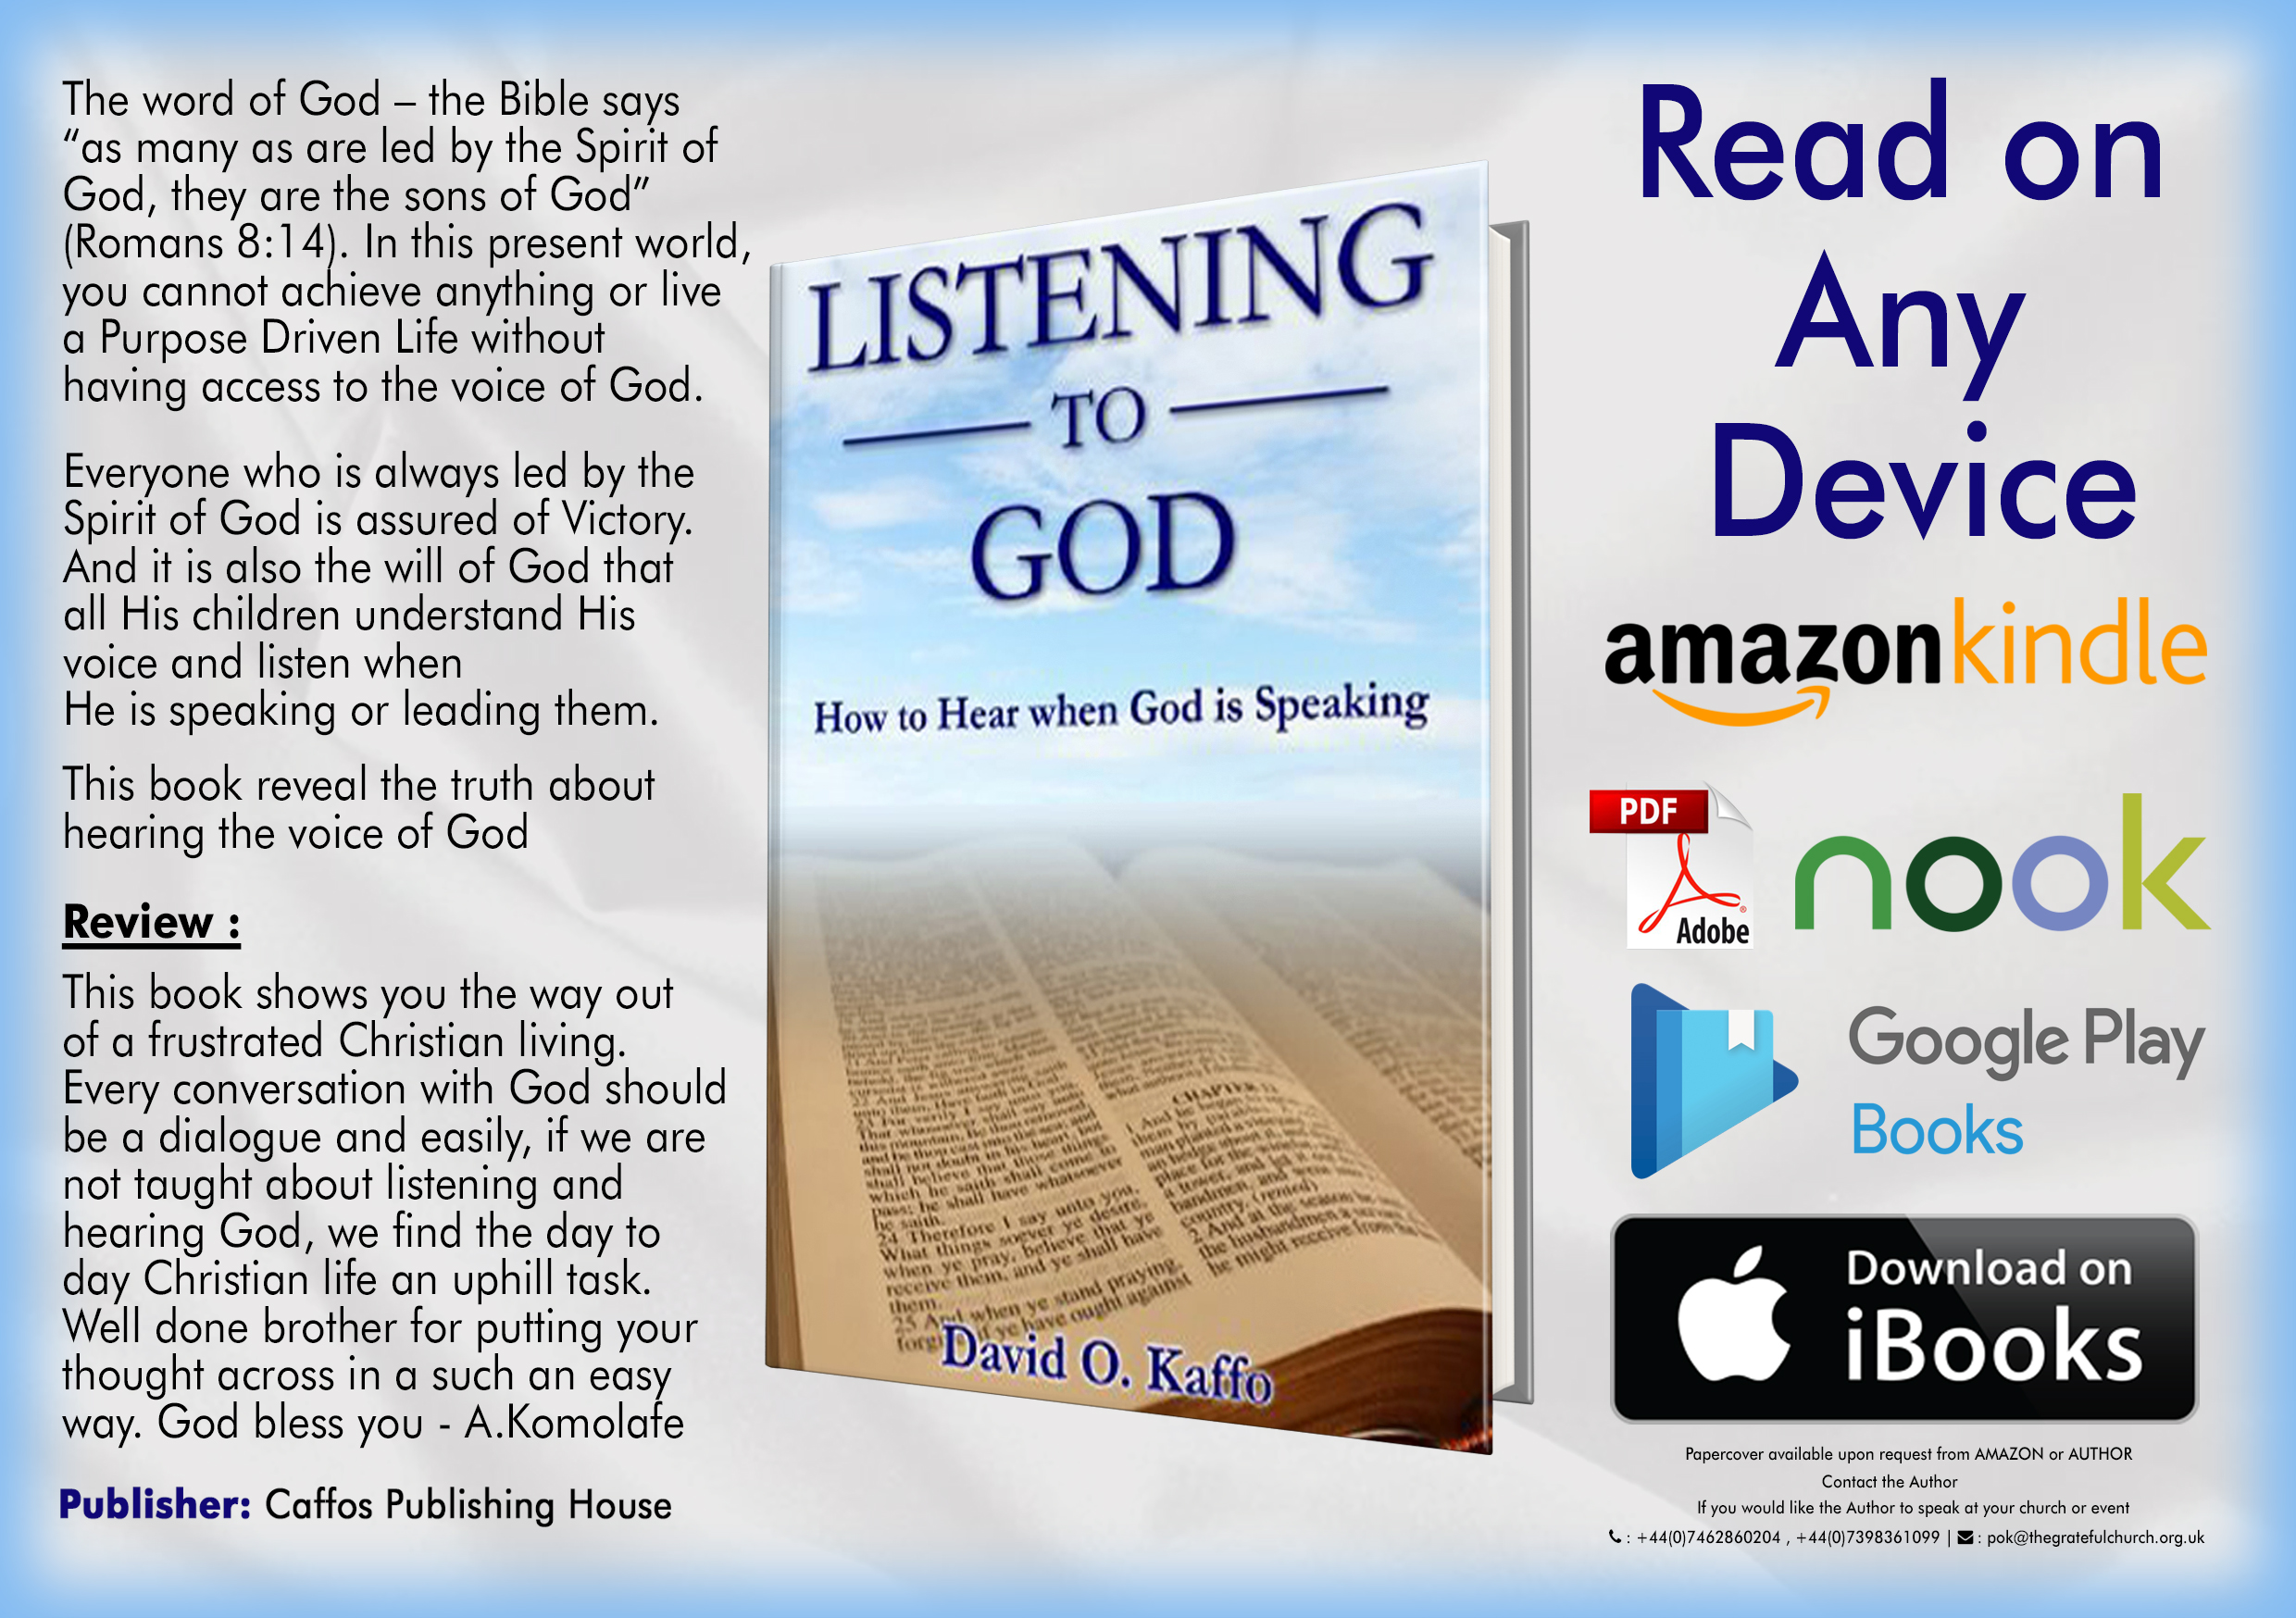 Listening to God - by David Kaffo on The Christian Mail